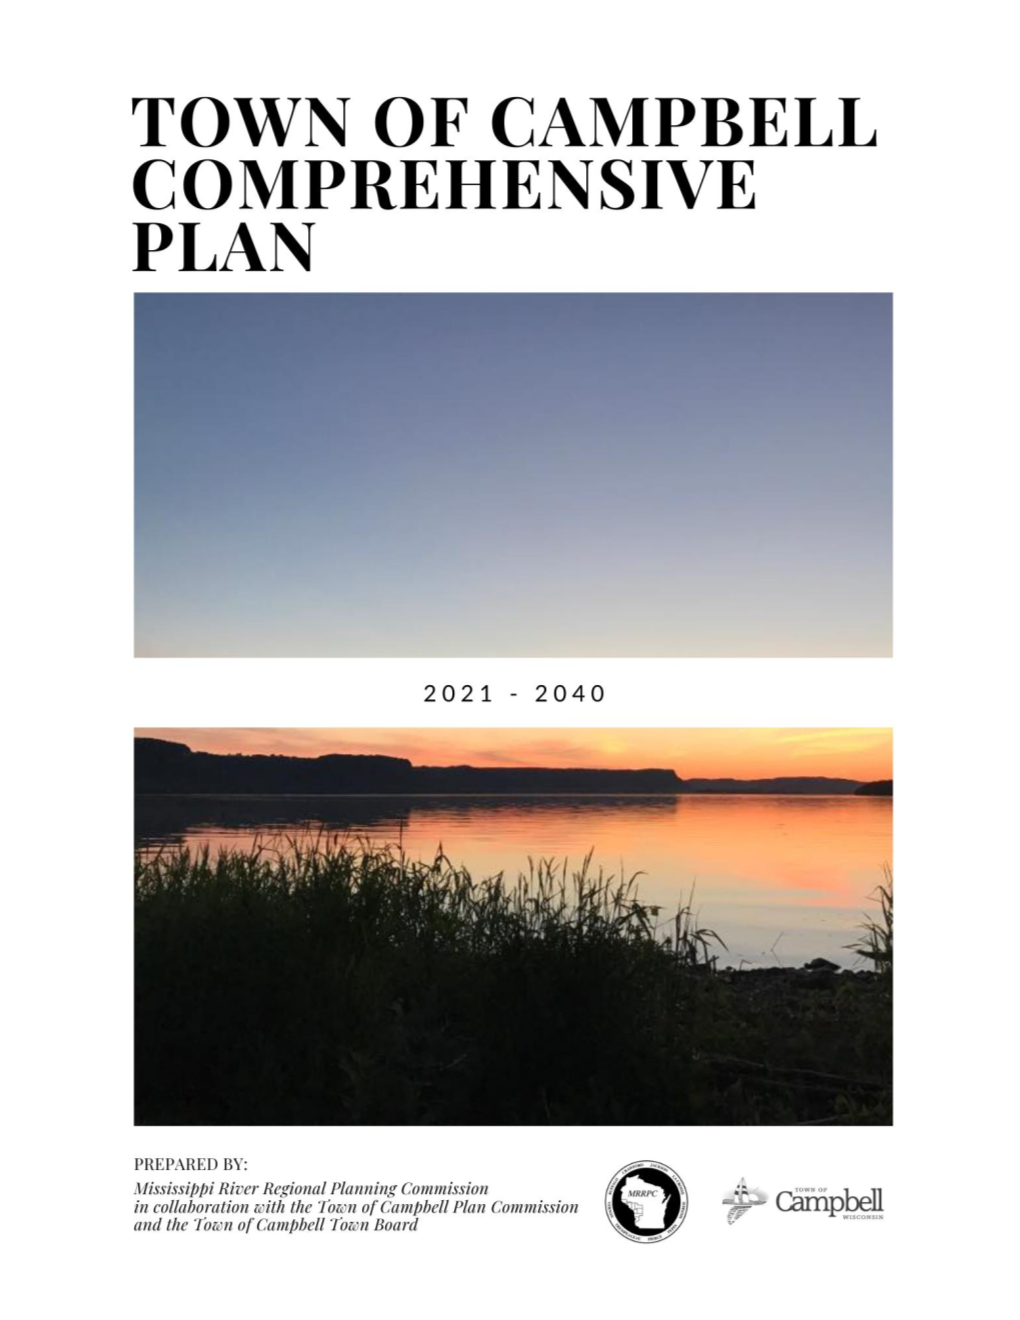 Town of Campbell Comprehensive Plan 2021-2040